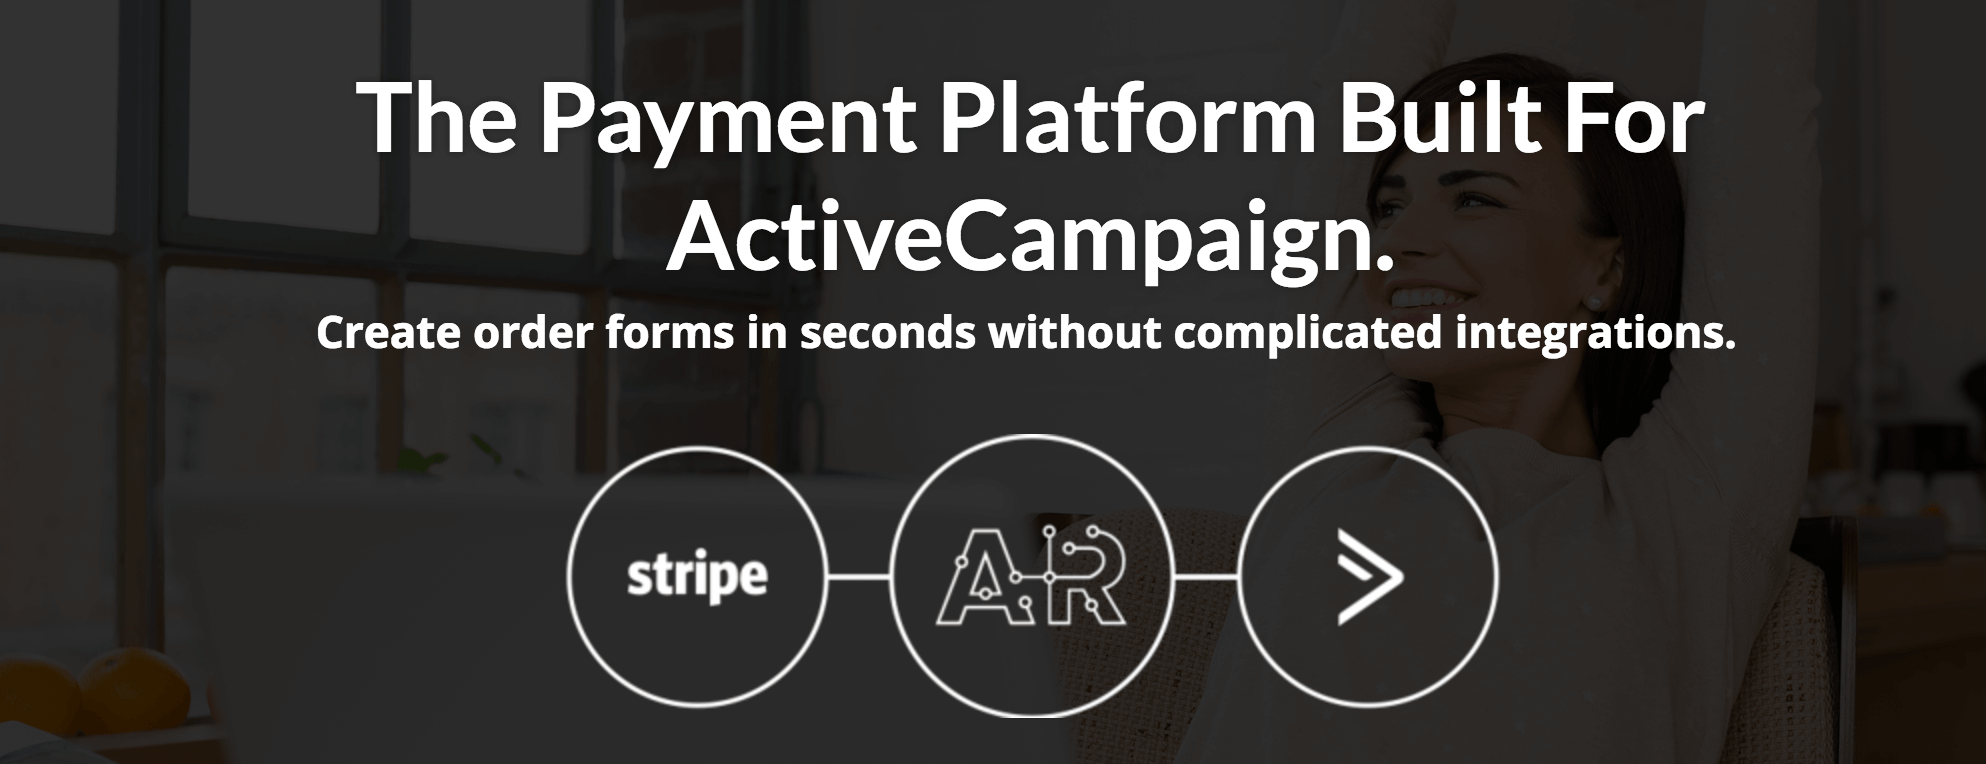 Active Relay - The Best Payment Platform for ActiveCampaign